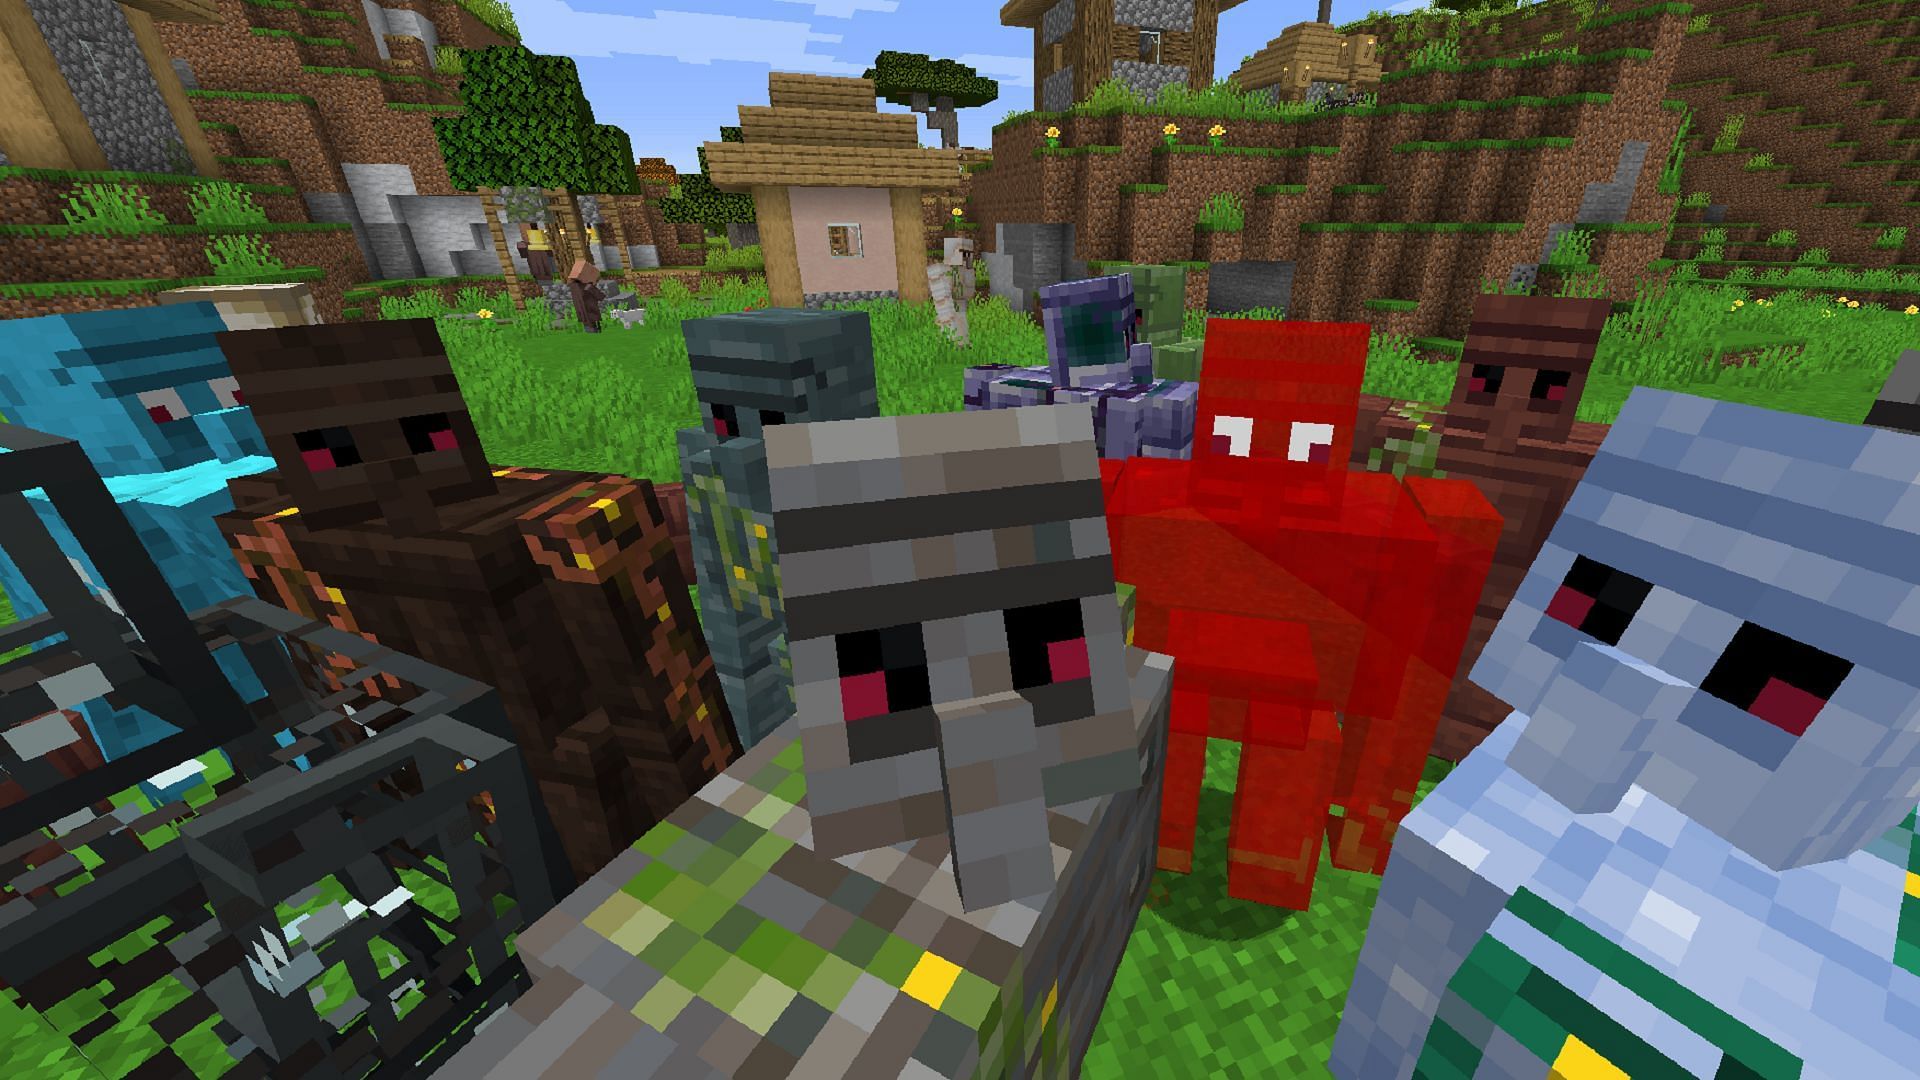 Various golems created by combining the Quark and Extra Golems mods (Image via skyjay1/CurseForge)